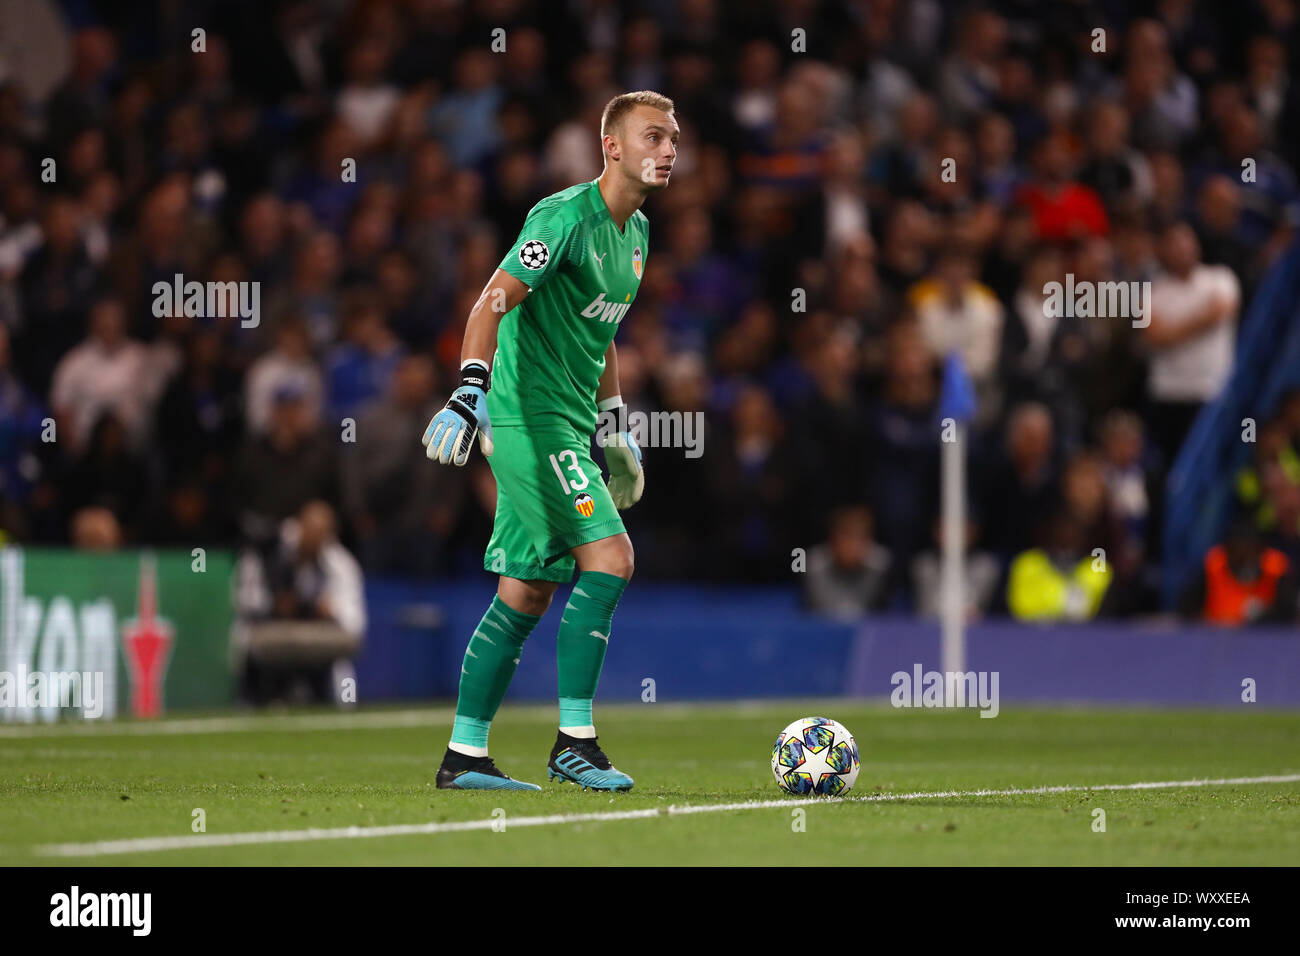 London, UK. 17th Sep, 2019. Jasper Cillessen of Valencia - Chelsea v Valencia, UEFA Champions League - Group H, Stamford Bridge, London, UK - 17th September 2019  Editorial Use Only Credit: MatchDay Images Limited/Alamy Live News Stock Photo